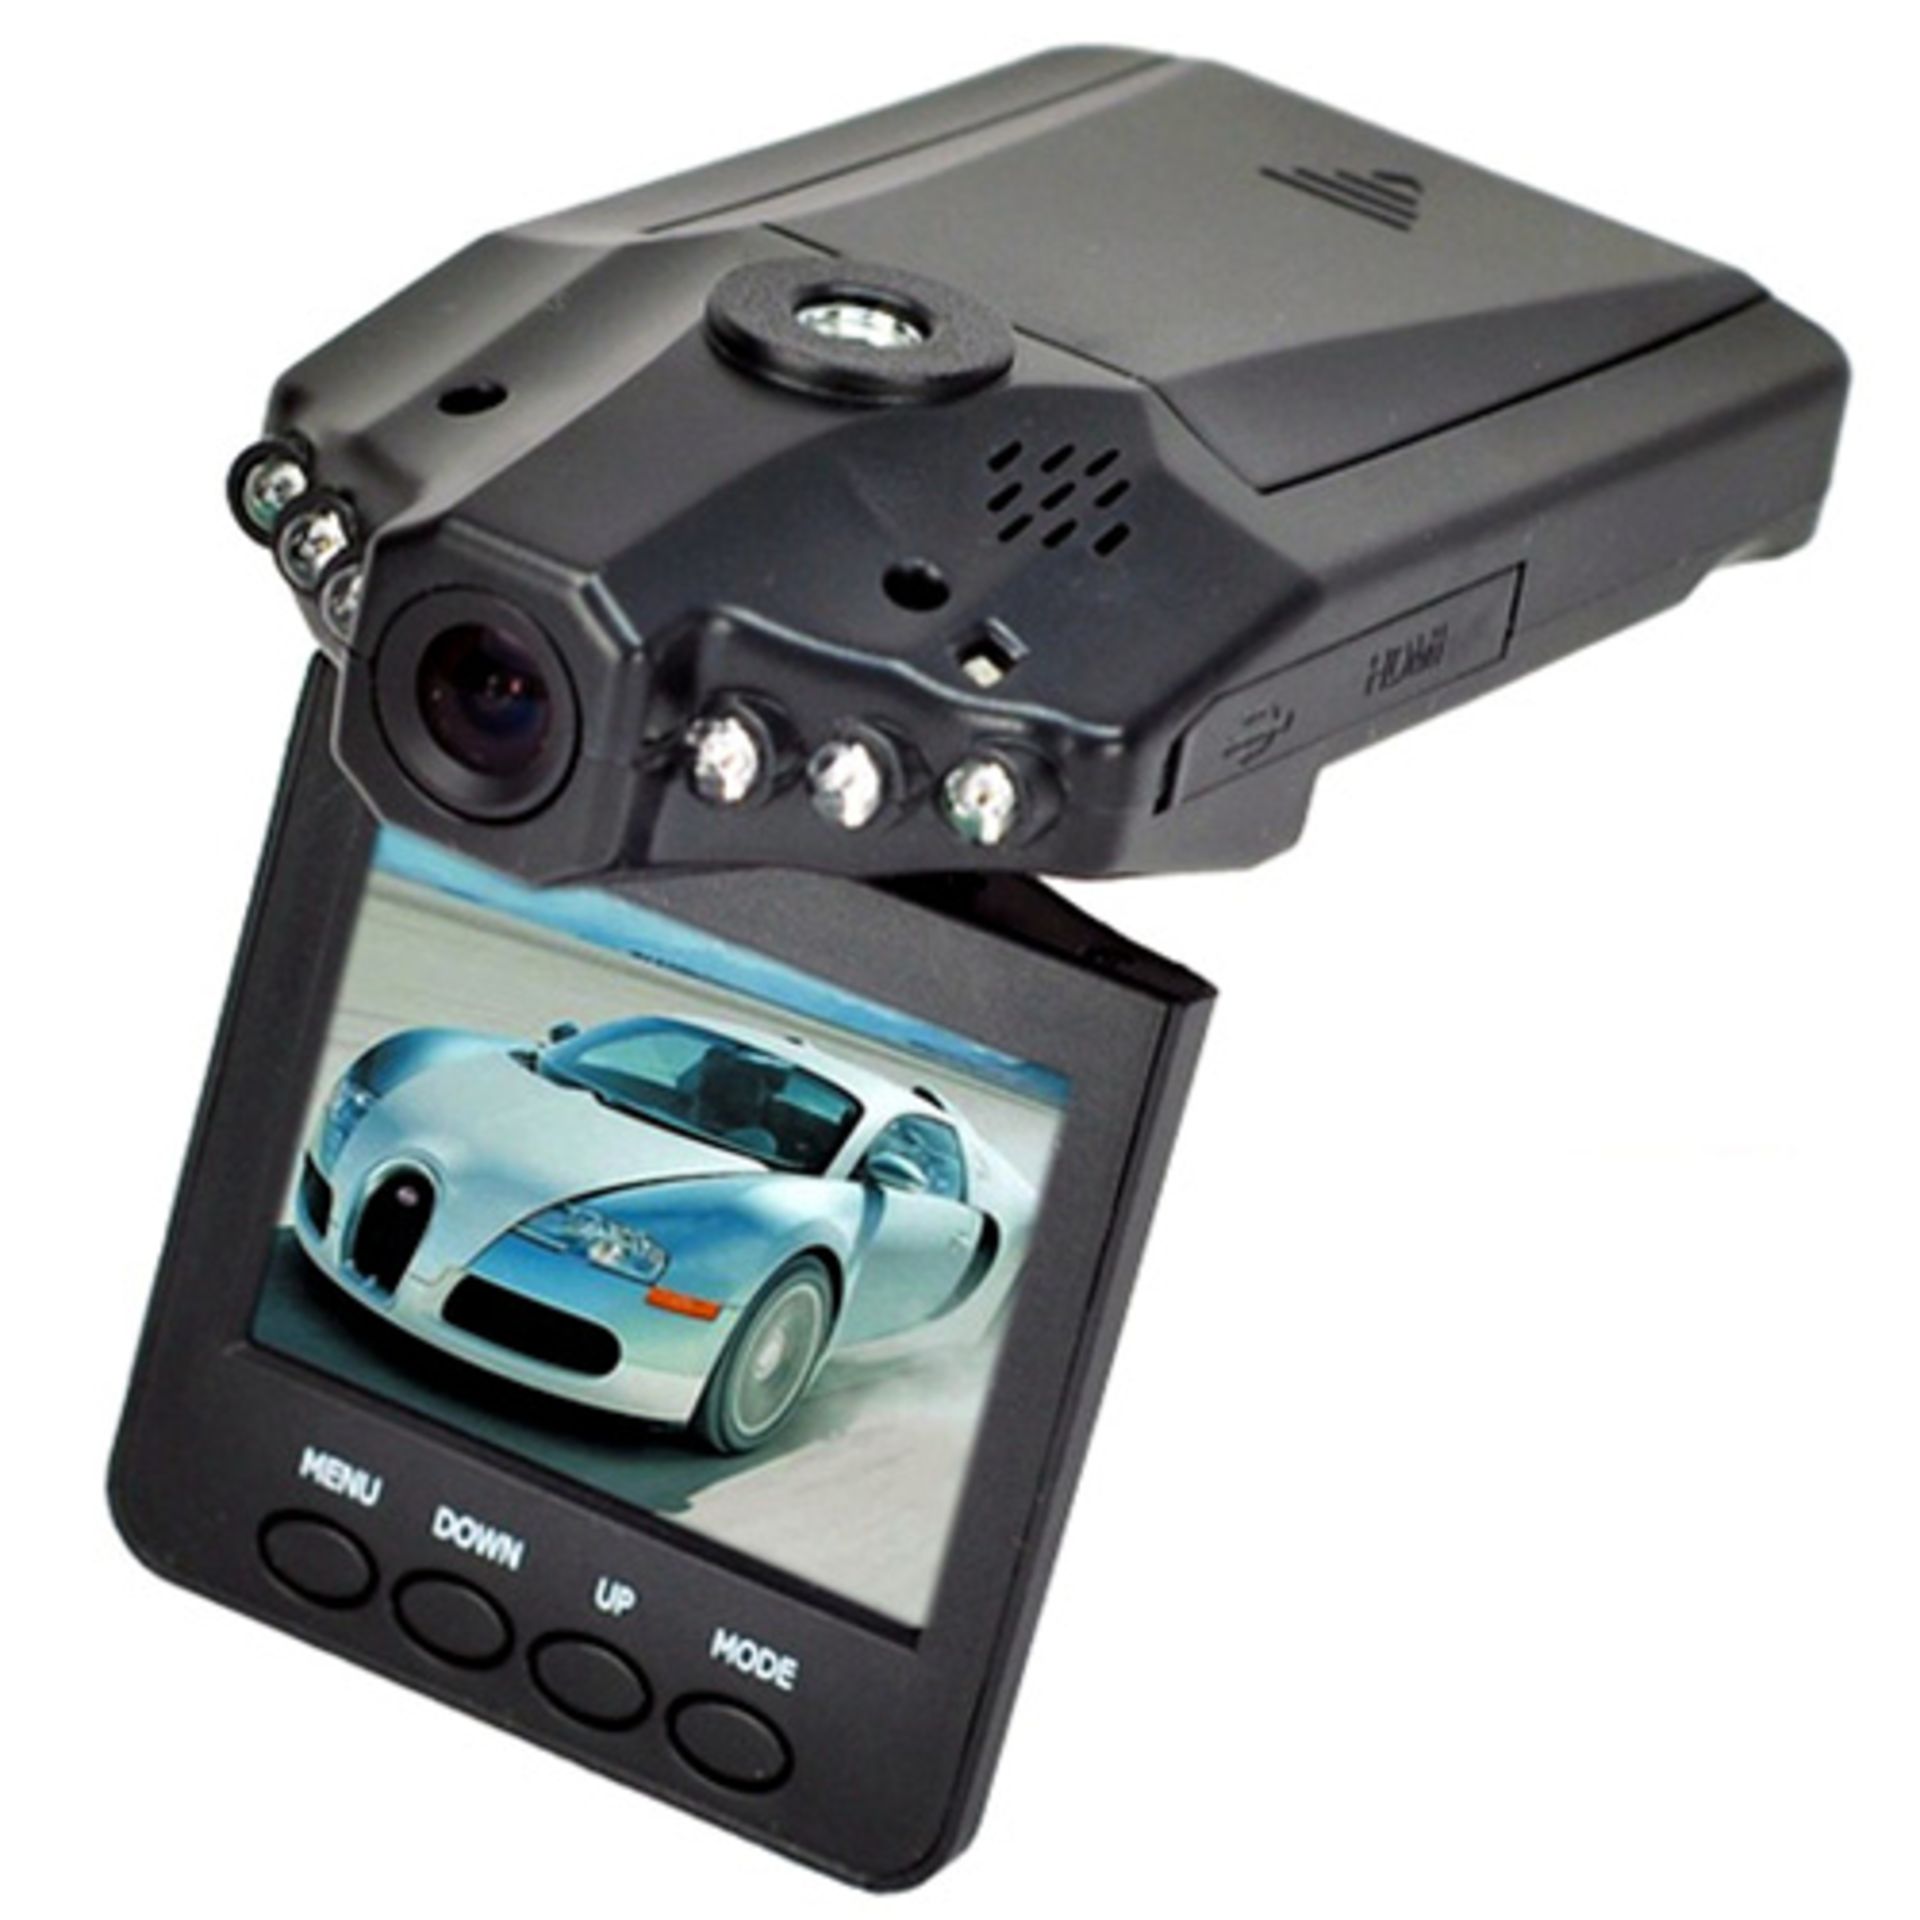 V Brand New HD Portable DVR Dashboard Camera With 2.5" TFT LCD Screen